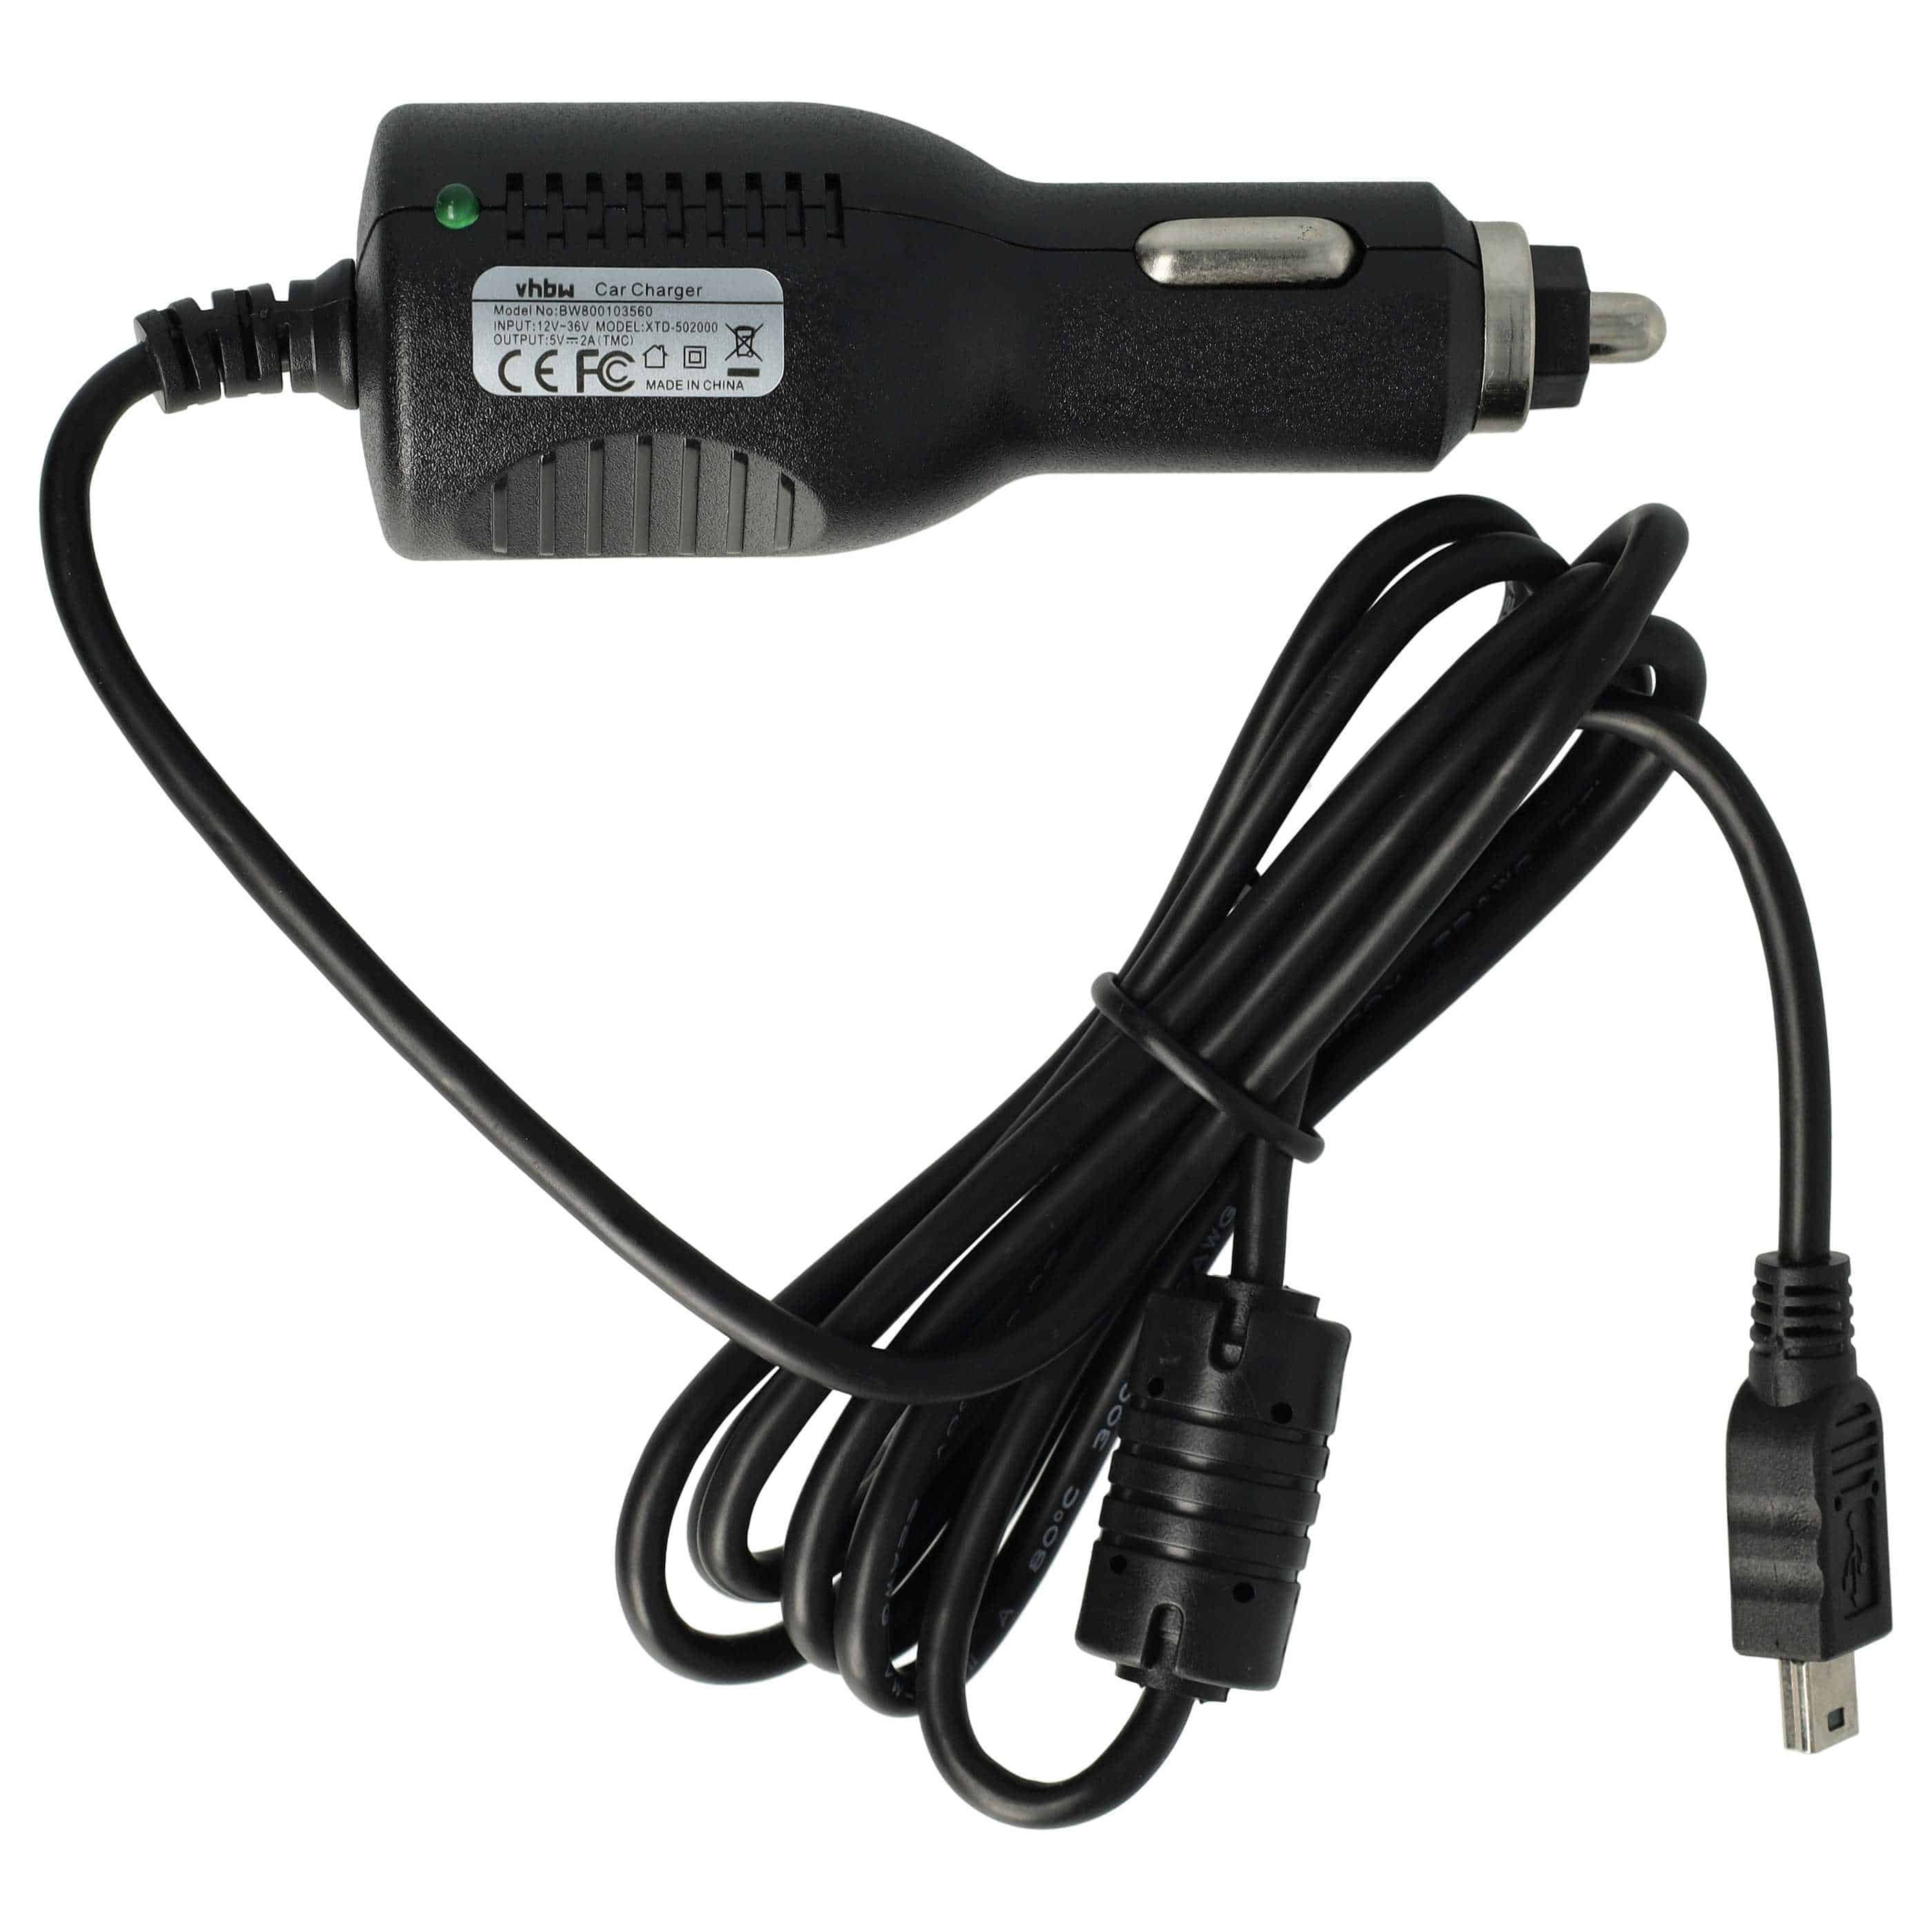 Mini-USB Car Charger Cable 2.0 A suitable forDevices like GPS, Sat Navs + Integrated TMC Antenna